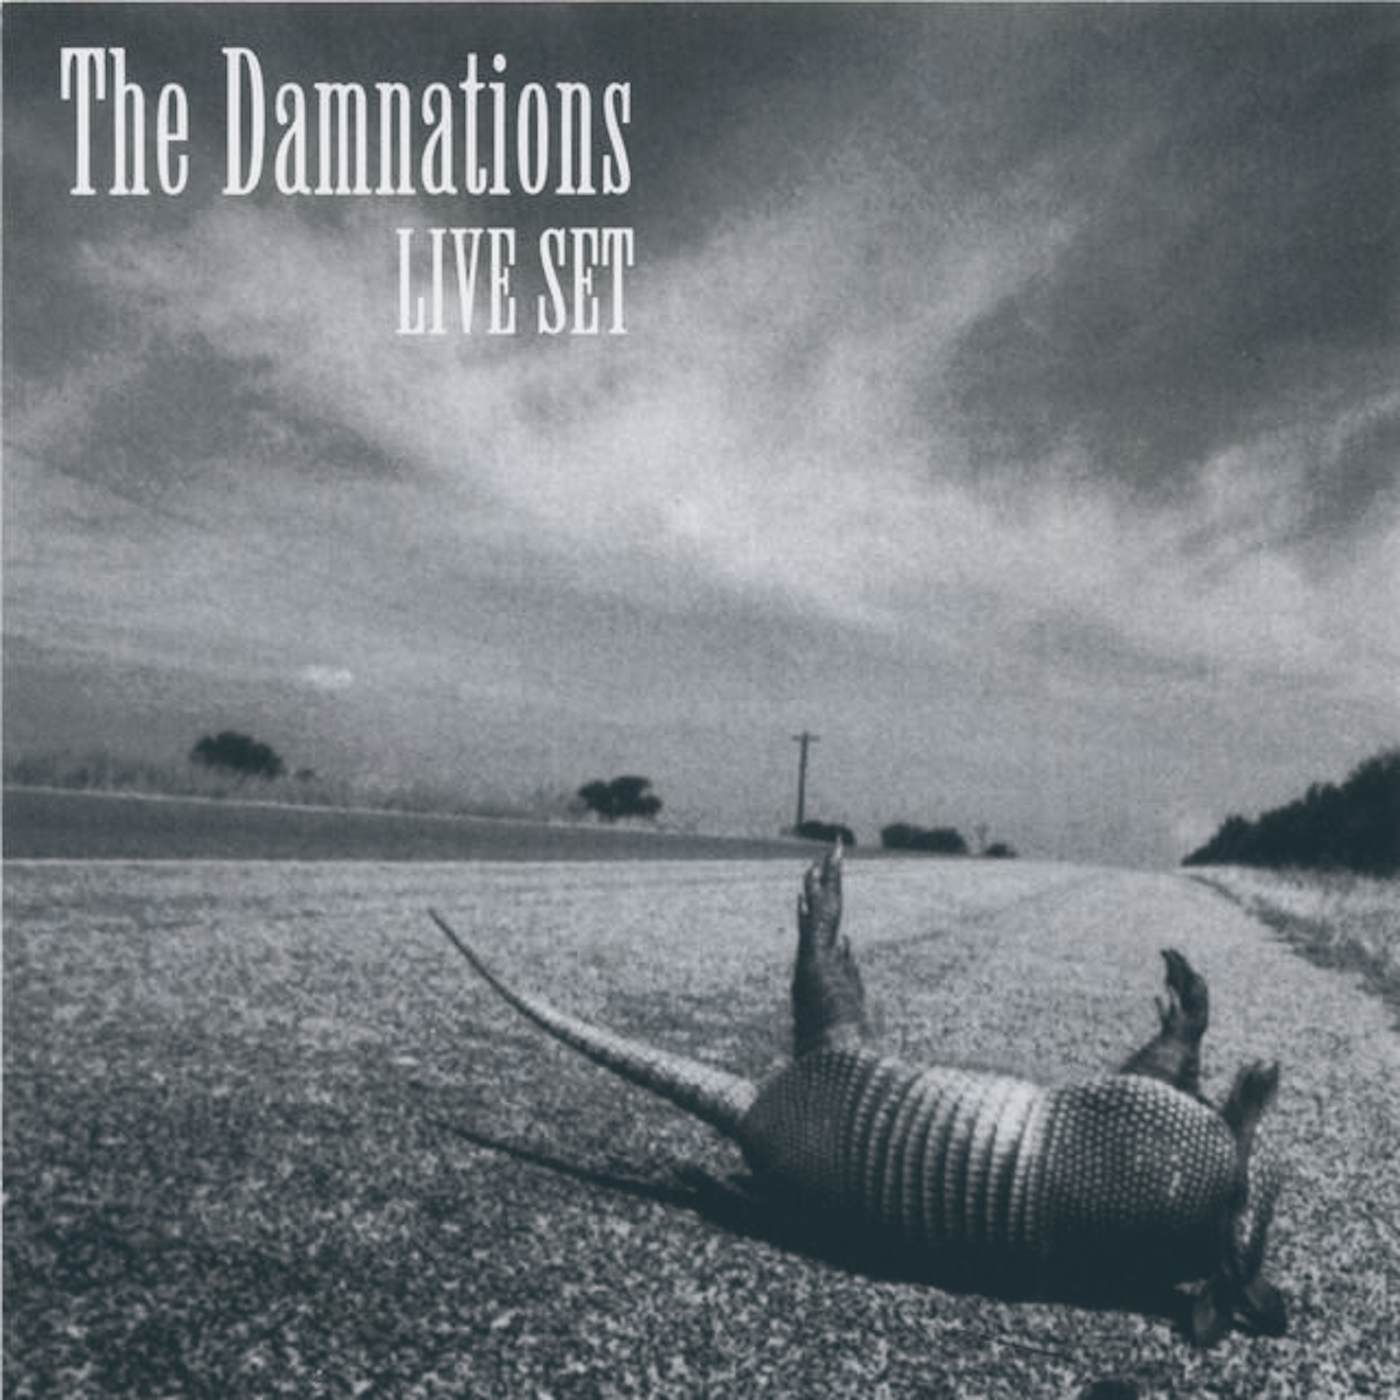 The Damnations